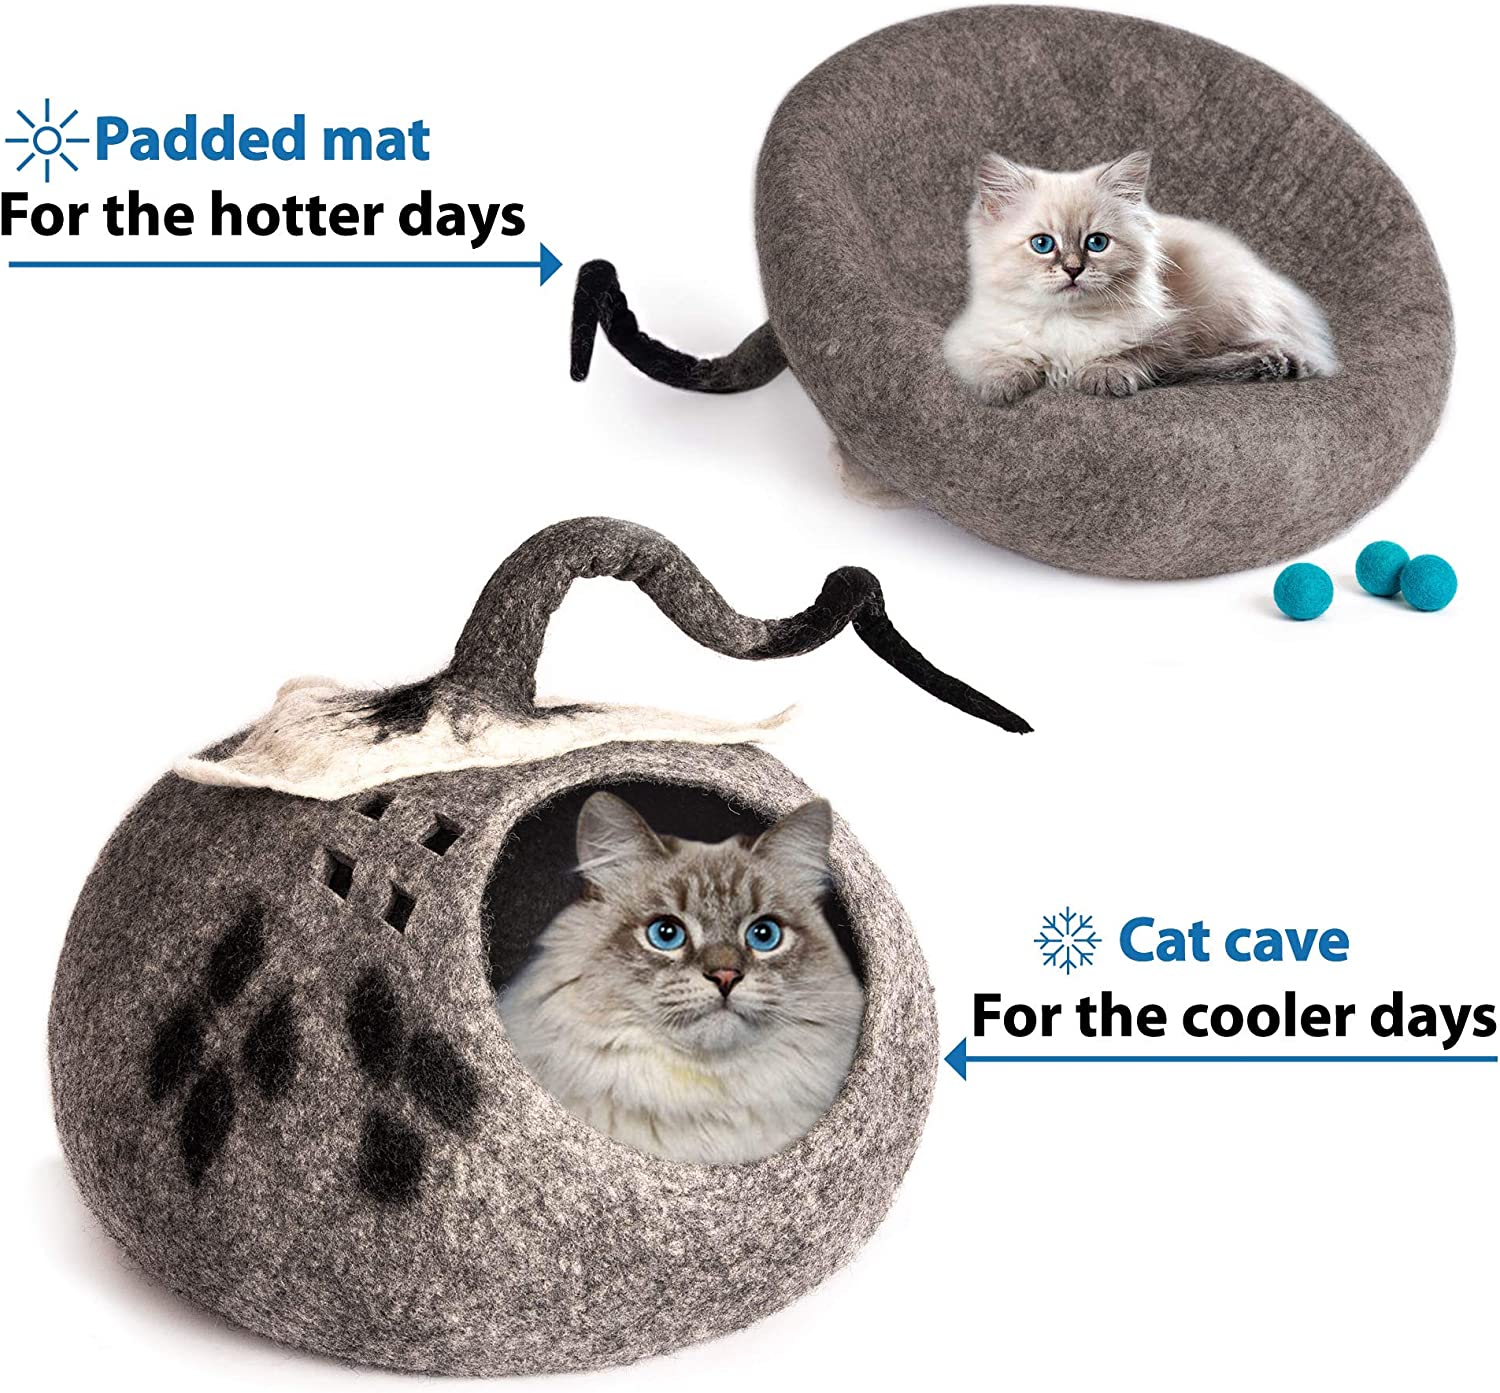 2 variants use meowfia cat bed: padded mat & cat cave